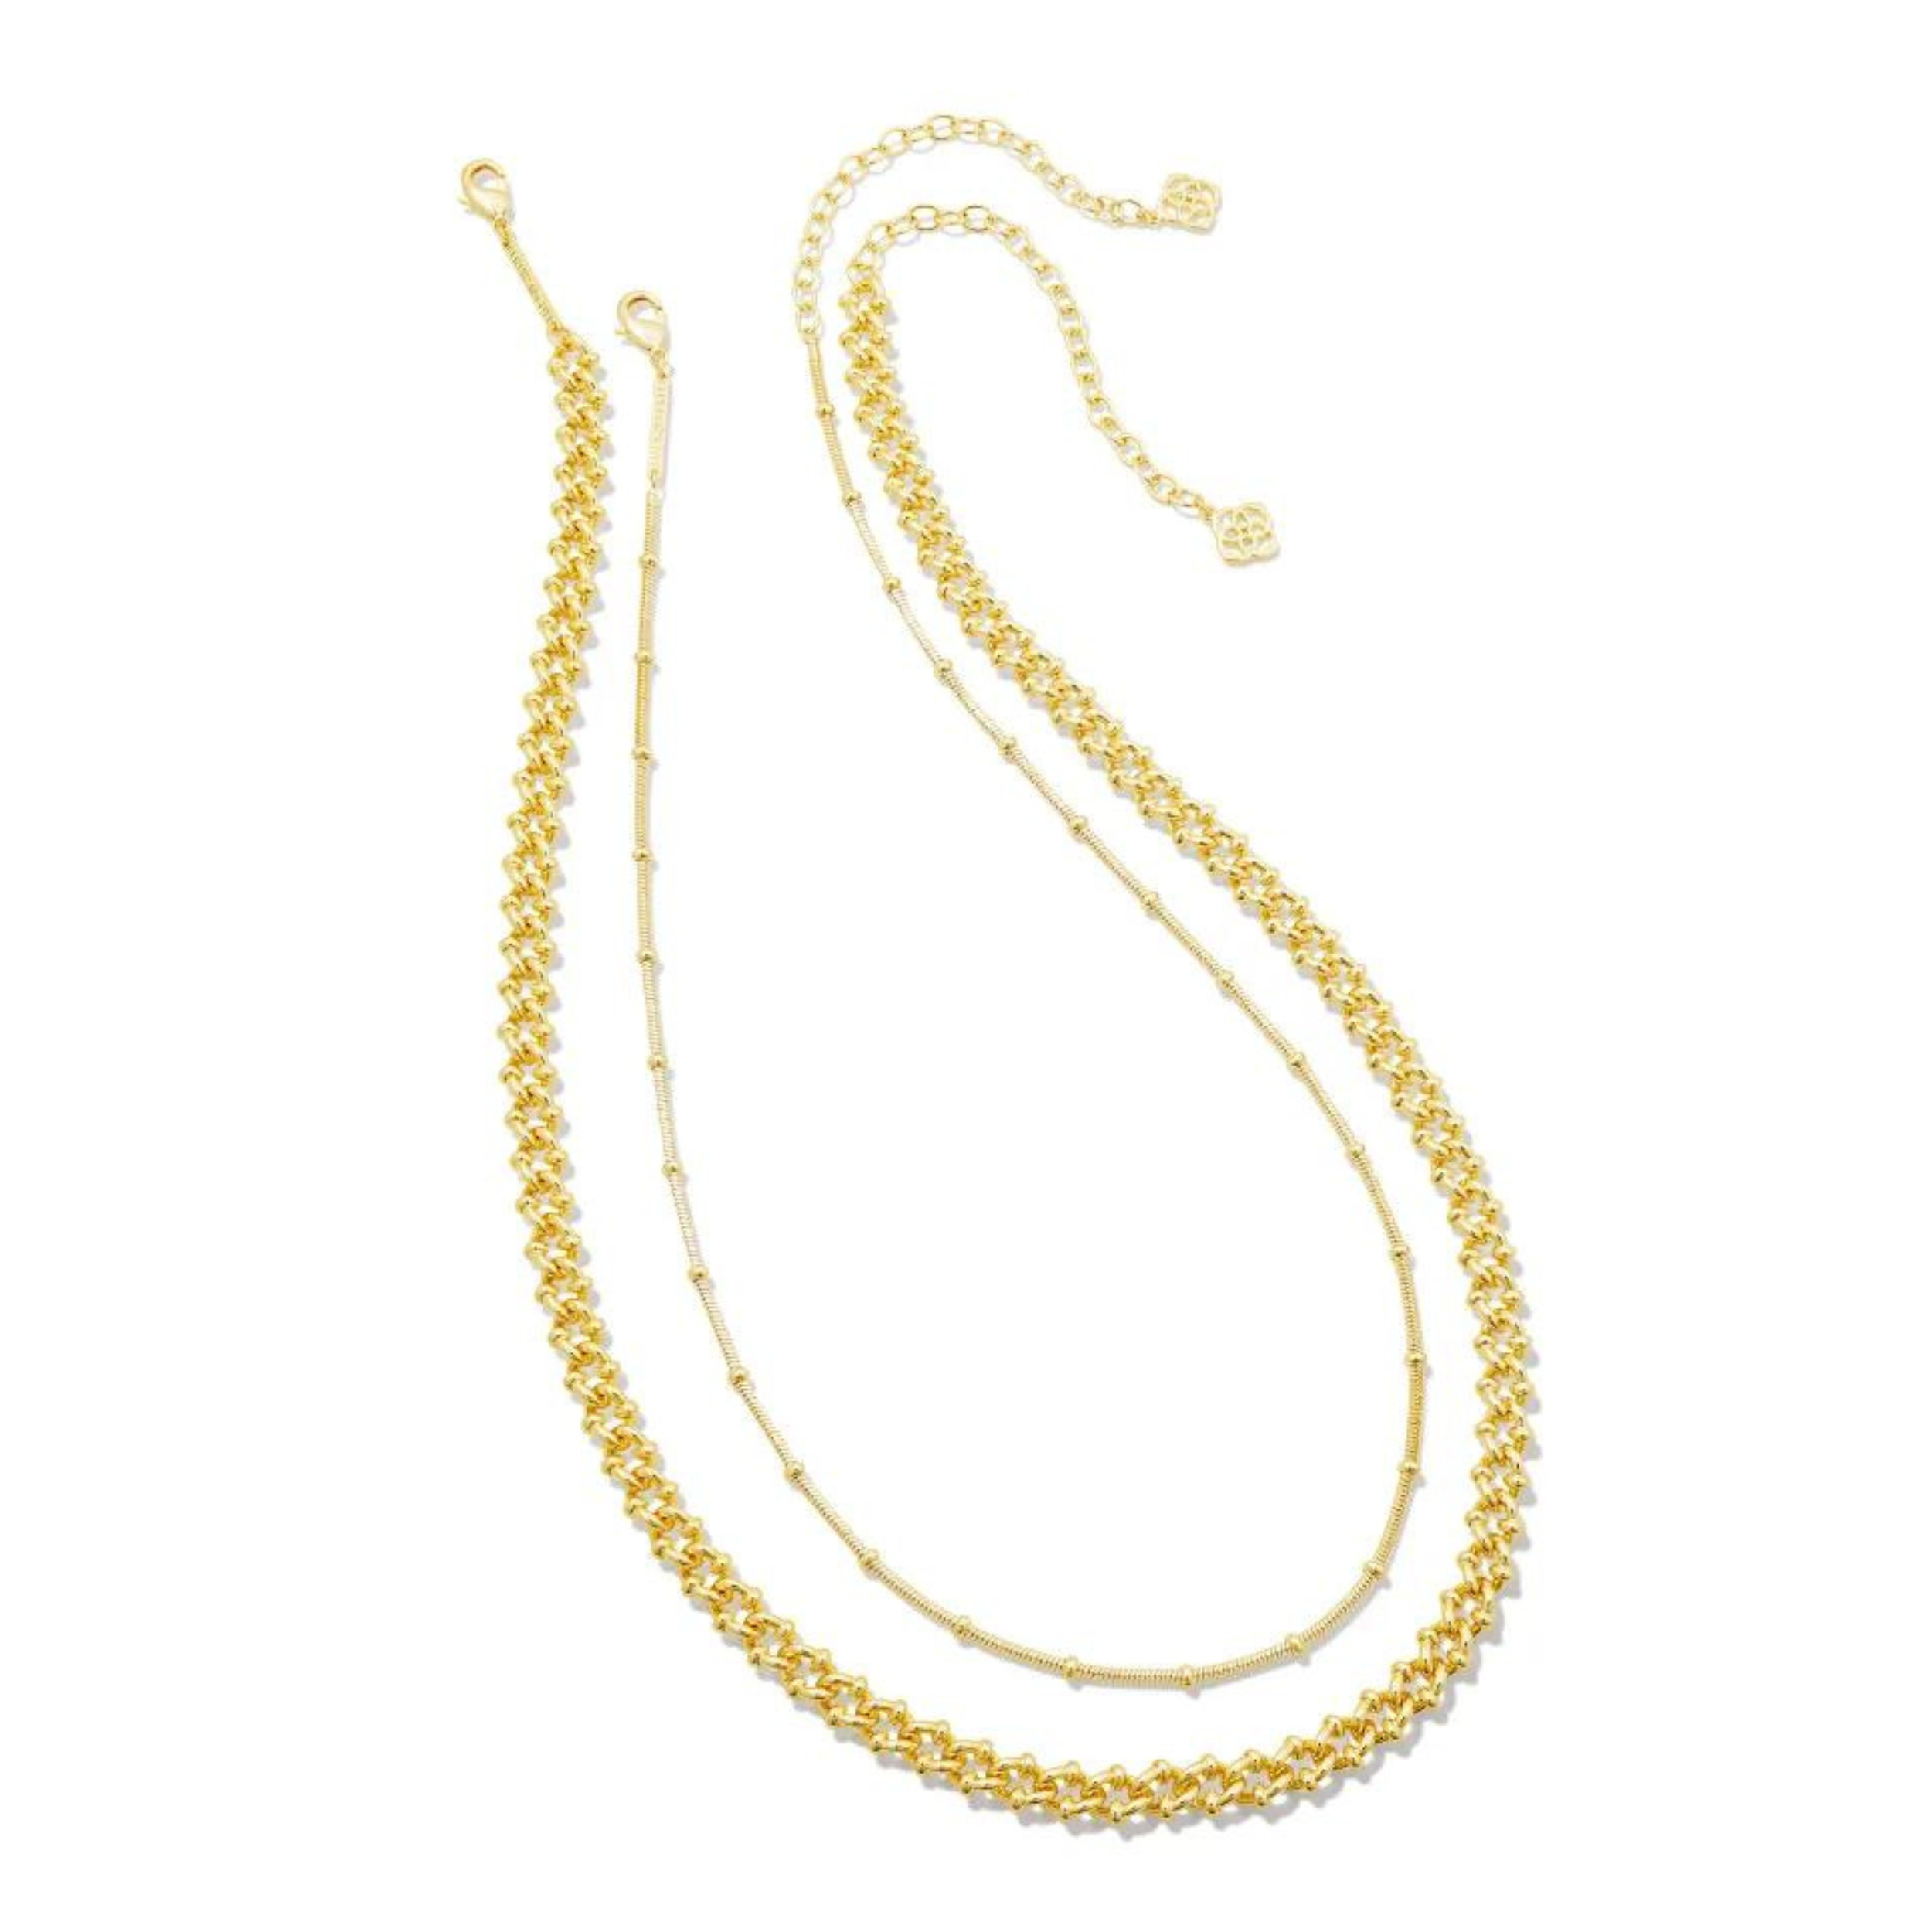 Two gold chain necklaces, pictured on a white background.